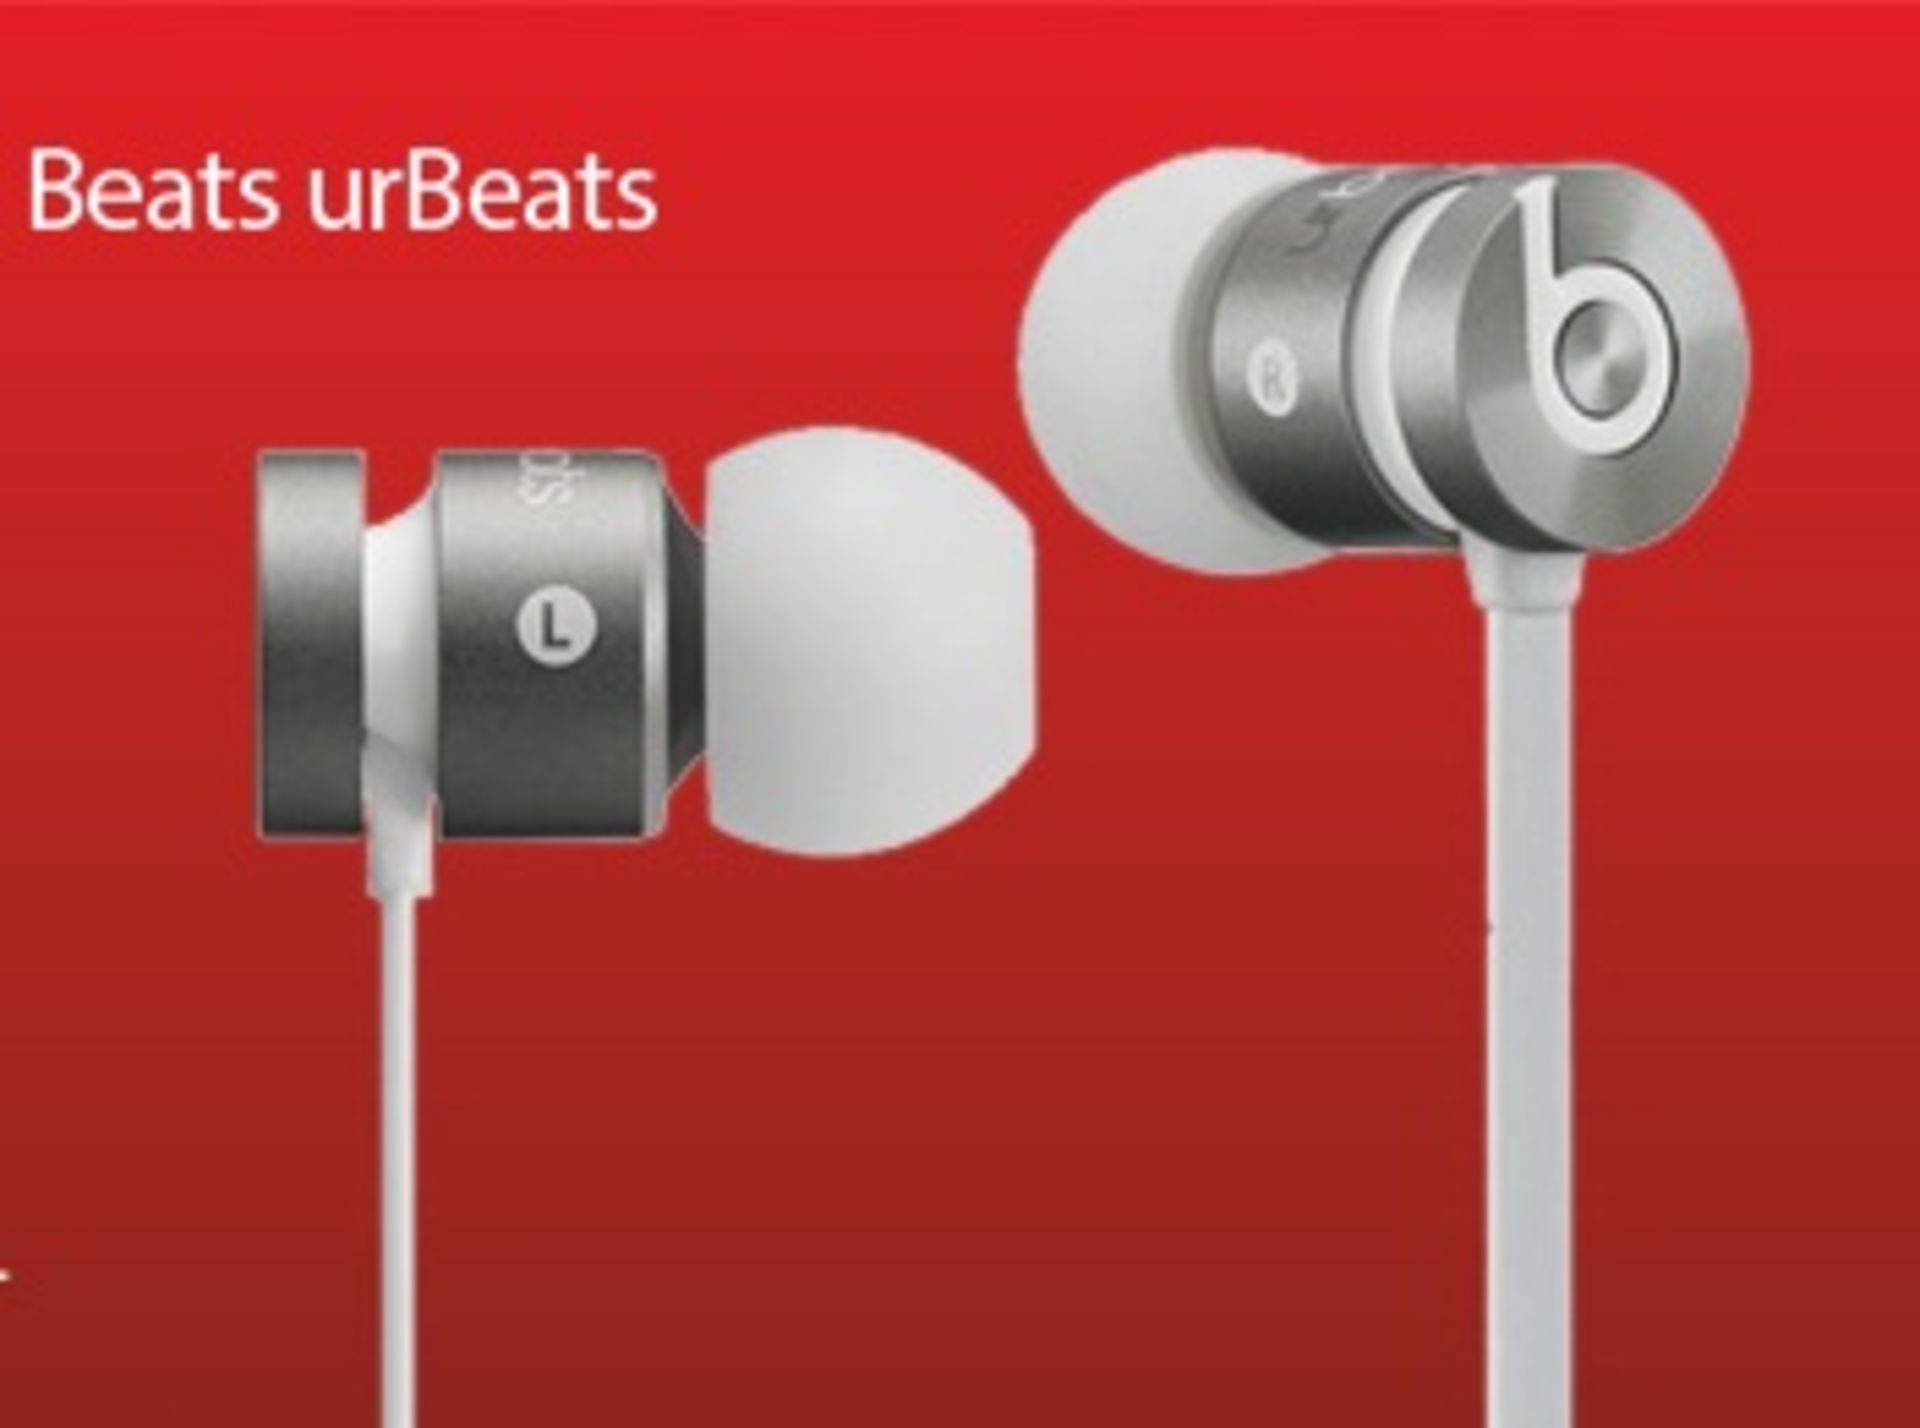 V *TRADE QTY* Brand New Beats By Dr Dre urBeats Earphones - Silver - These are boxed and sealed - - Image 2 of 2